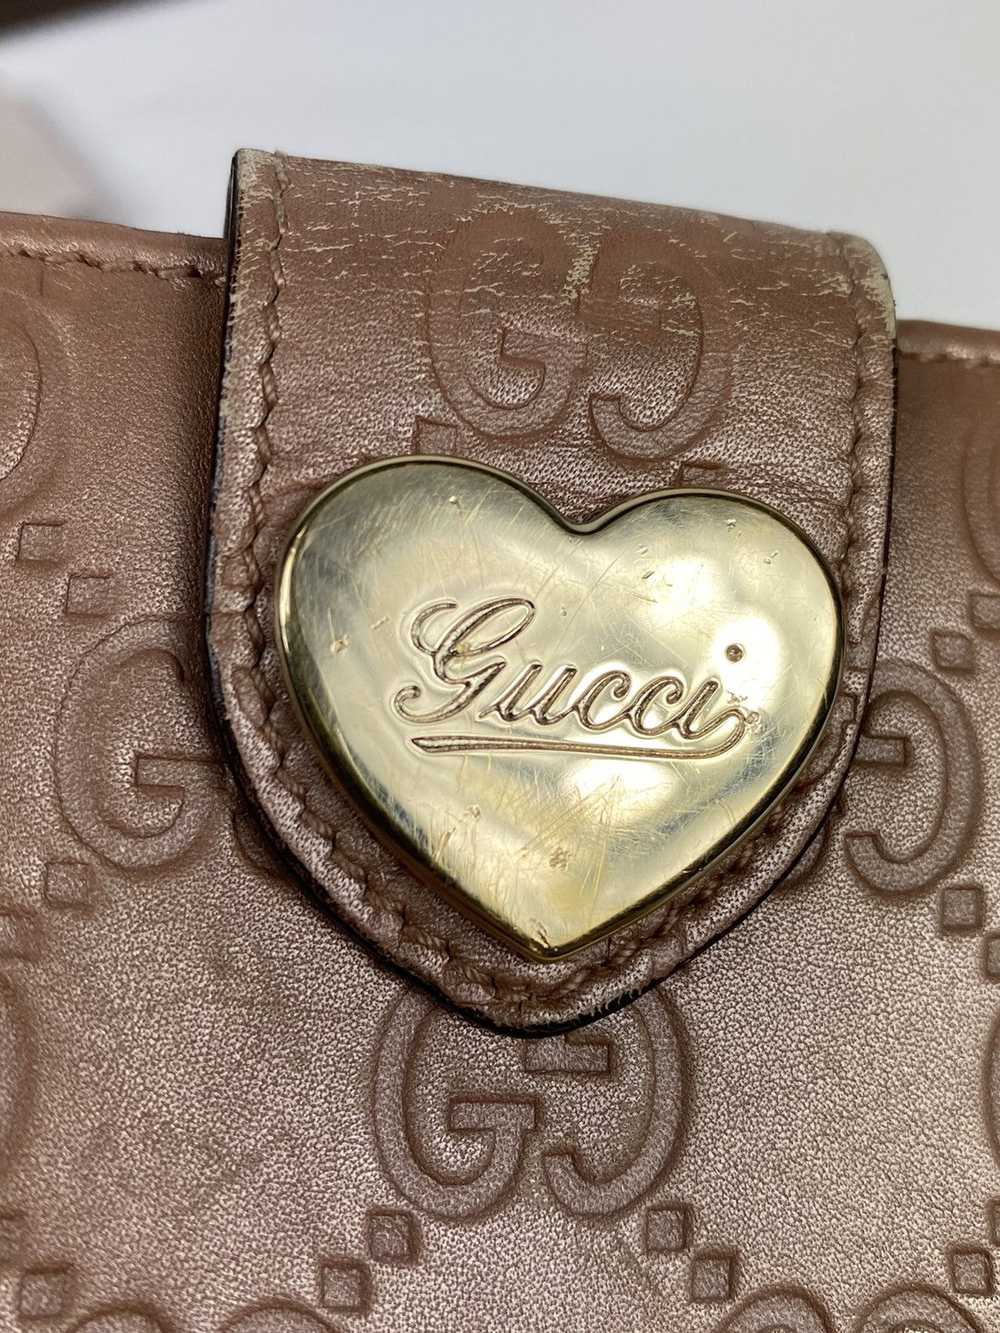 Gucci Gucci GG Guccissima leather long wallet - image 2